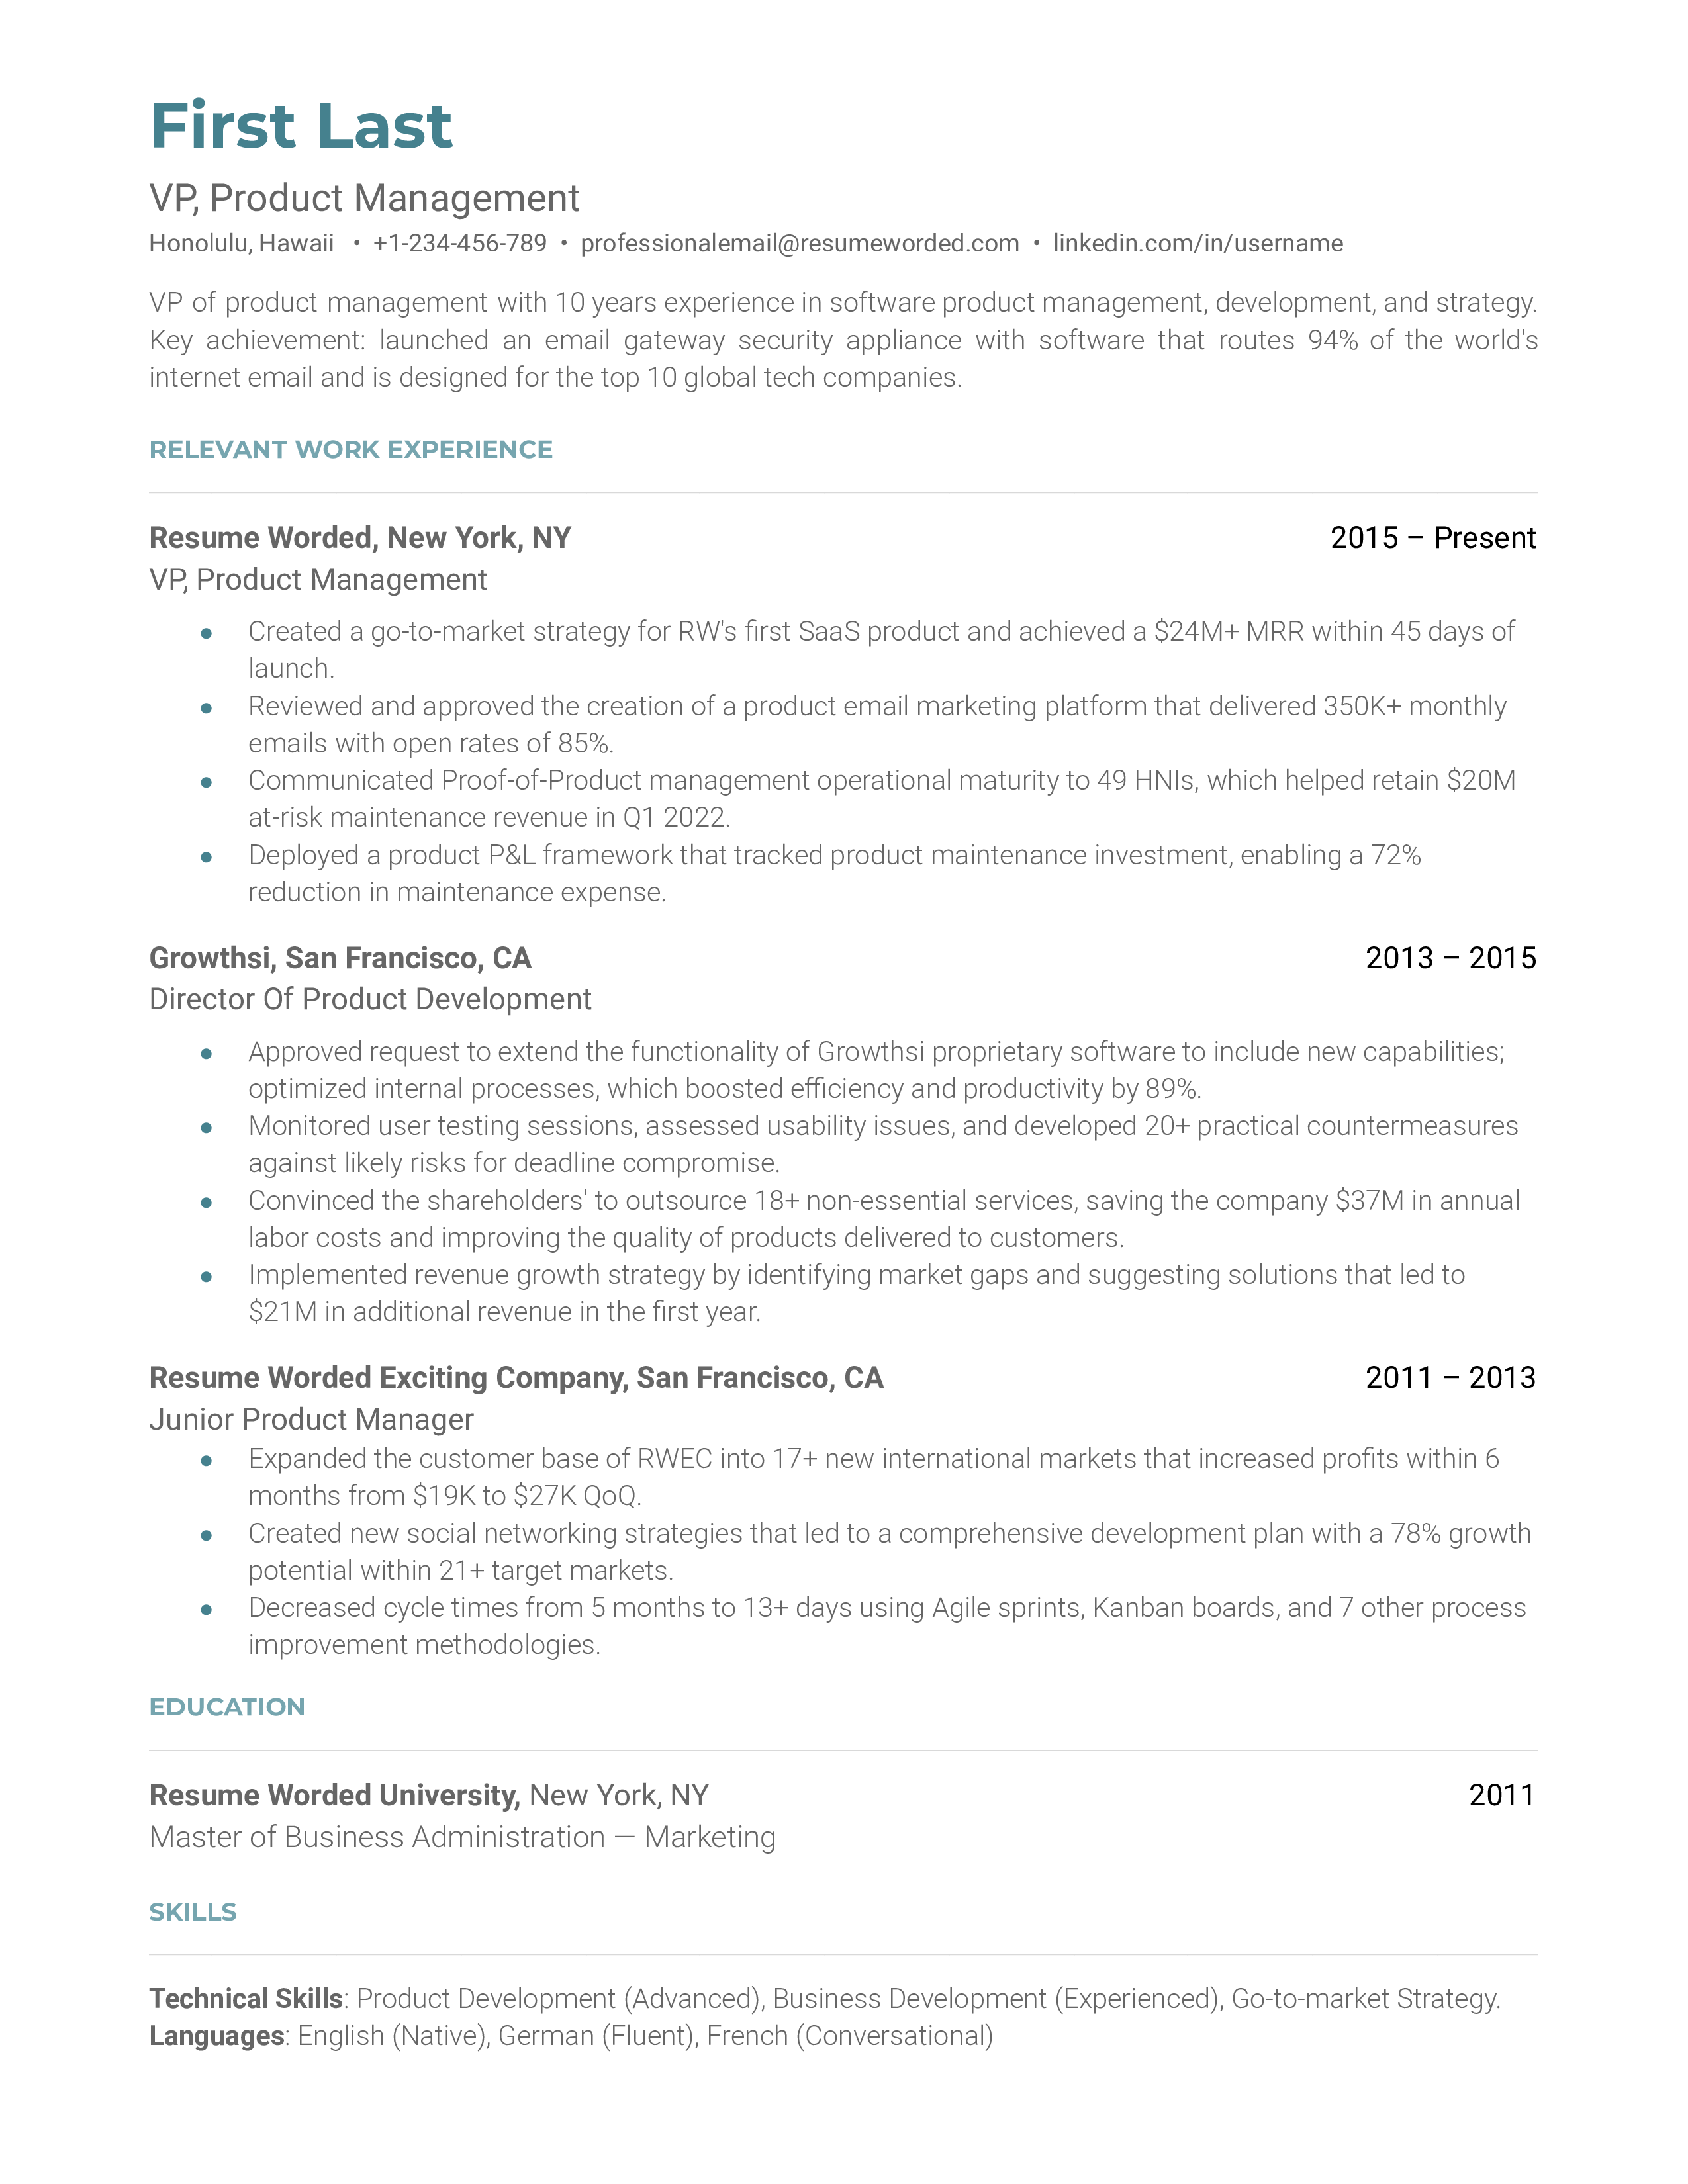 CV screenshot for a VP of Product Management role